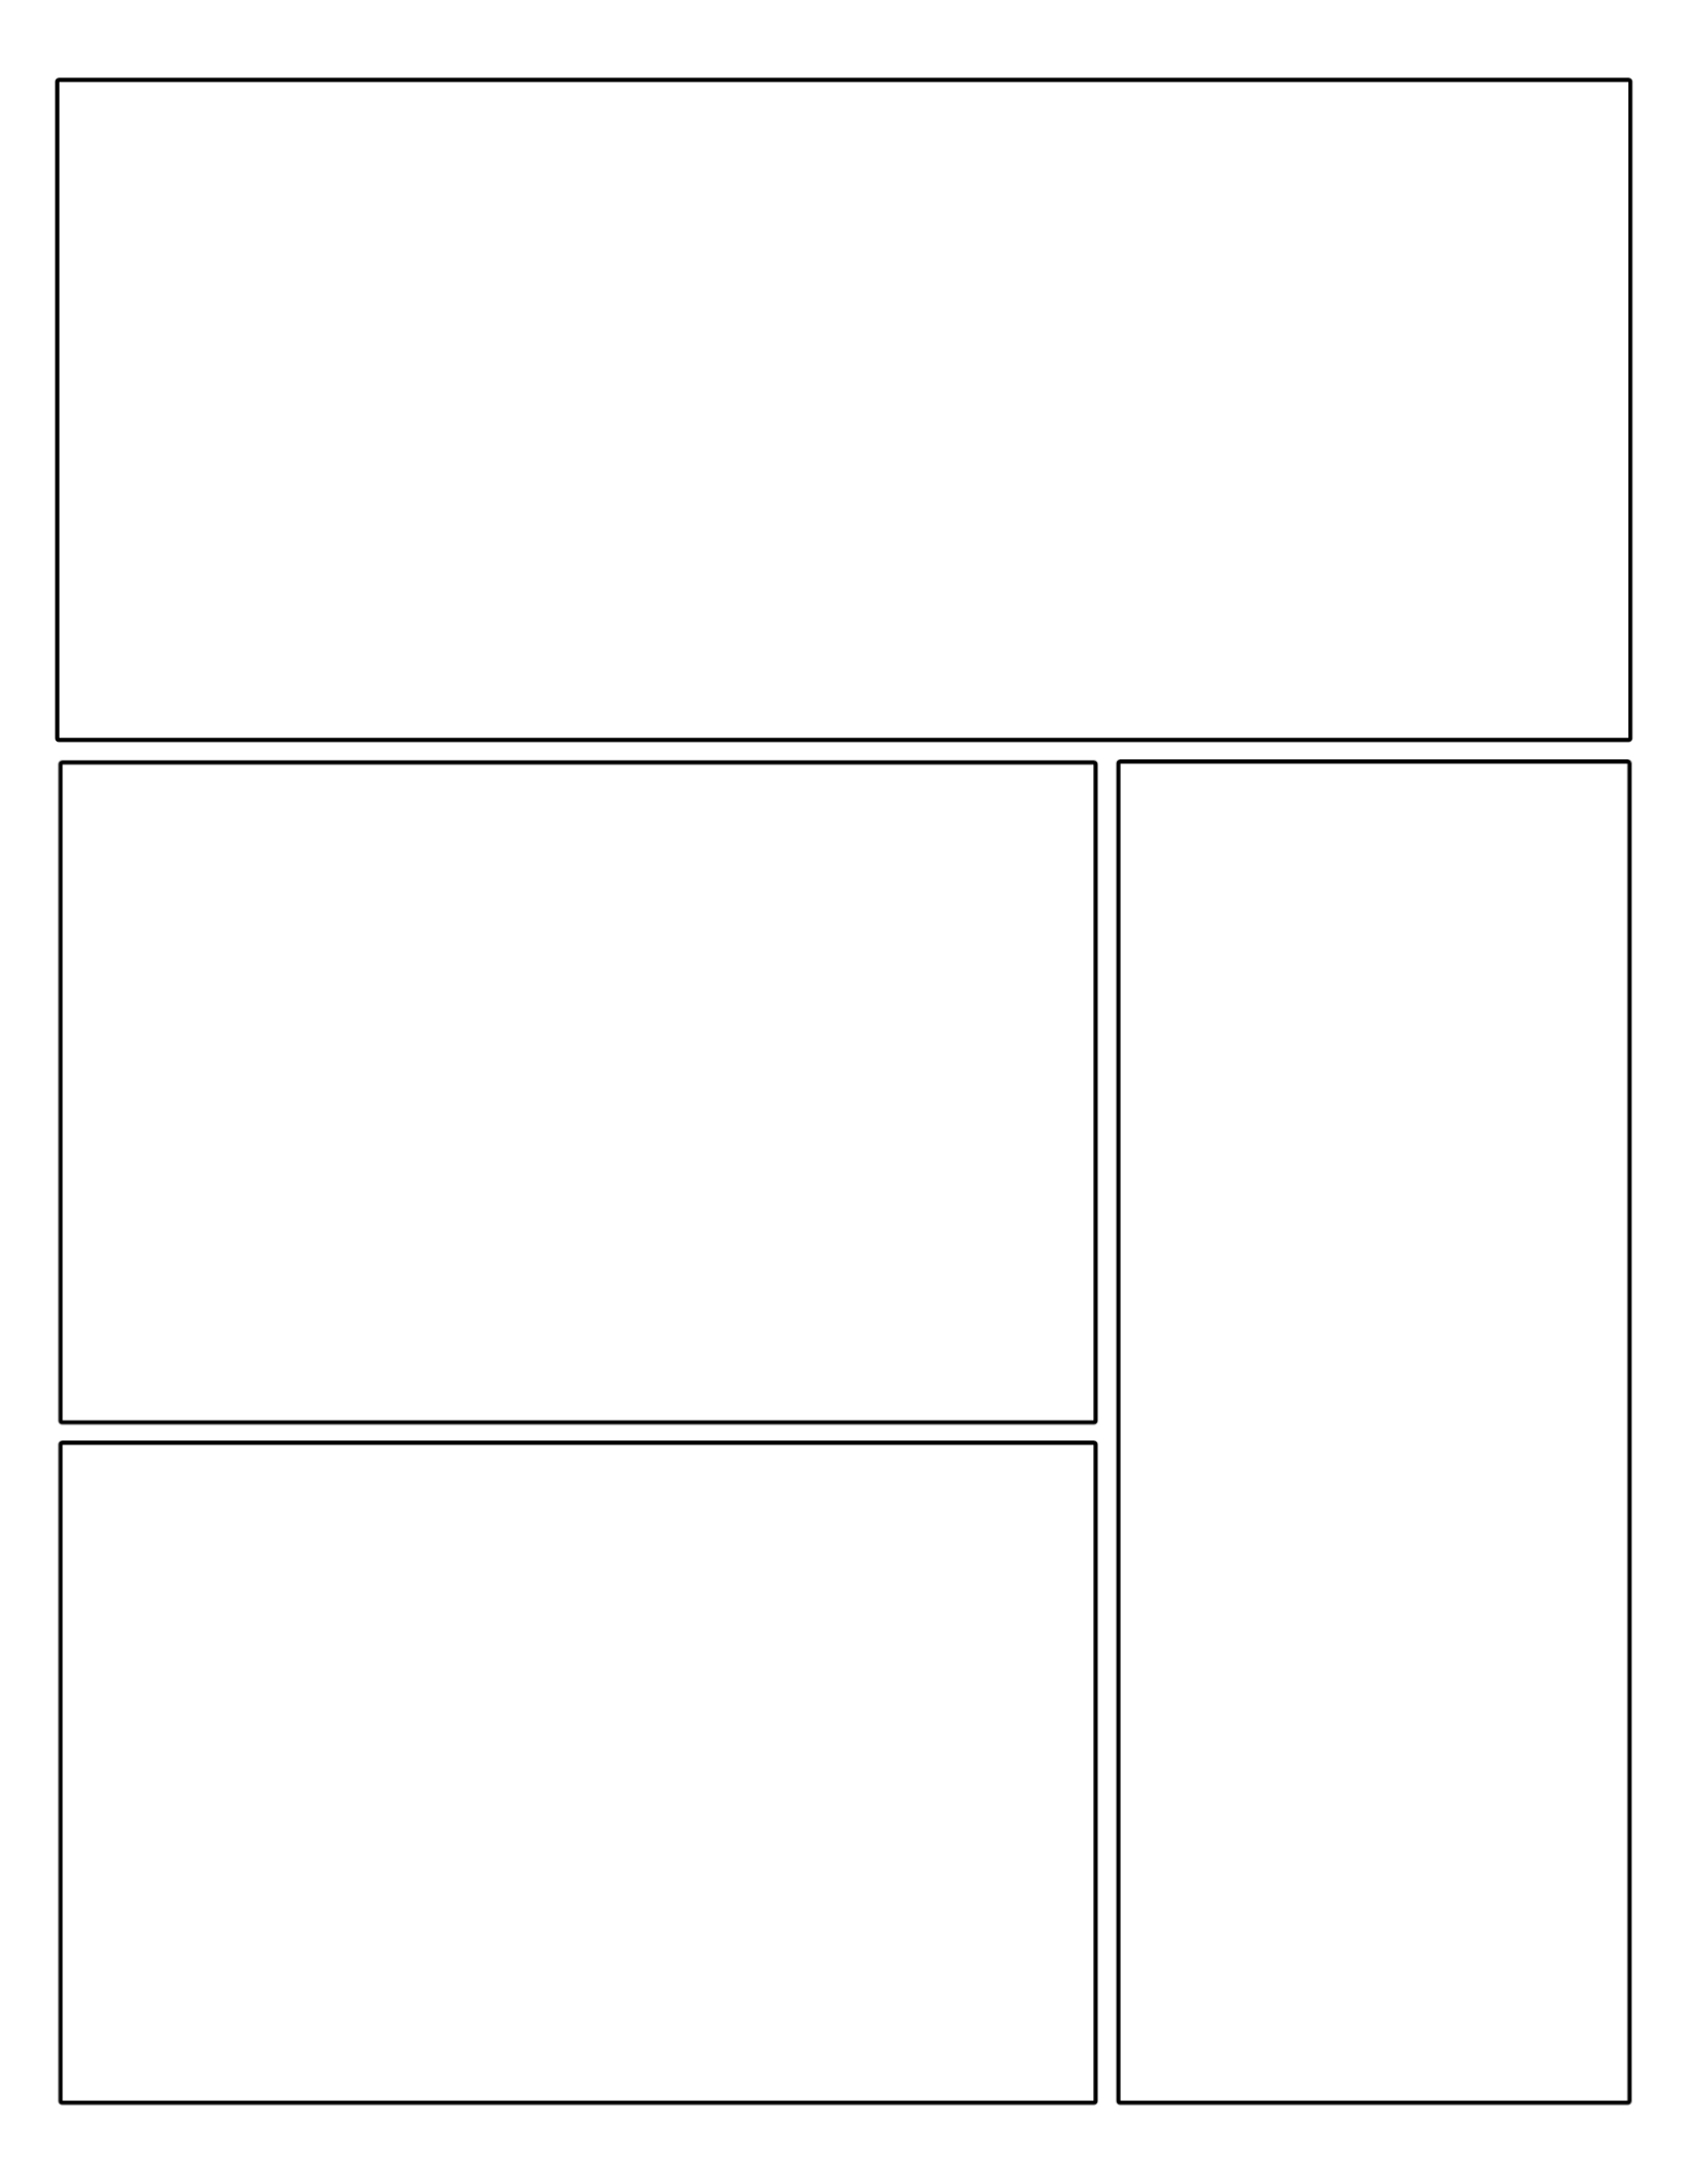 Free Printable Comic Strip Template Pages - Paper Trail Design With Printable Blank Comic Strip Template For Kids